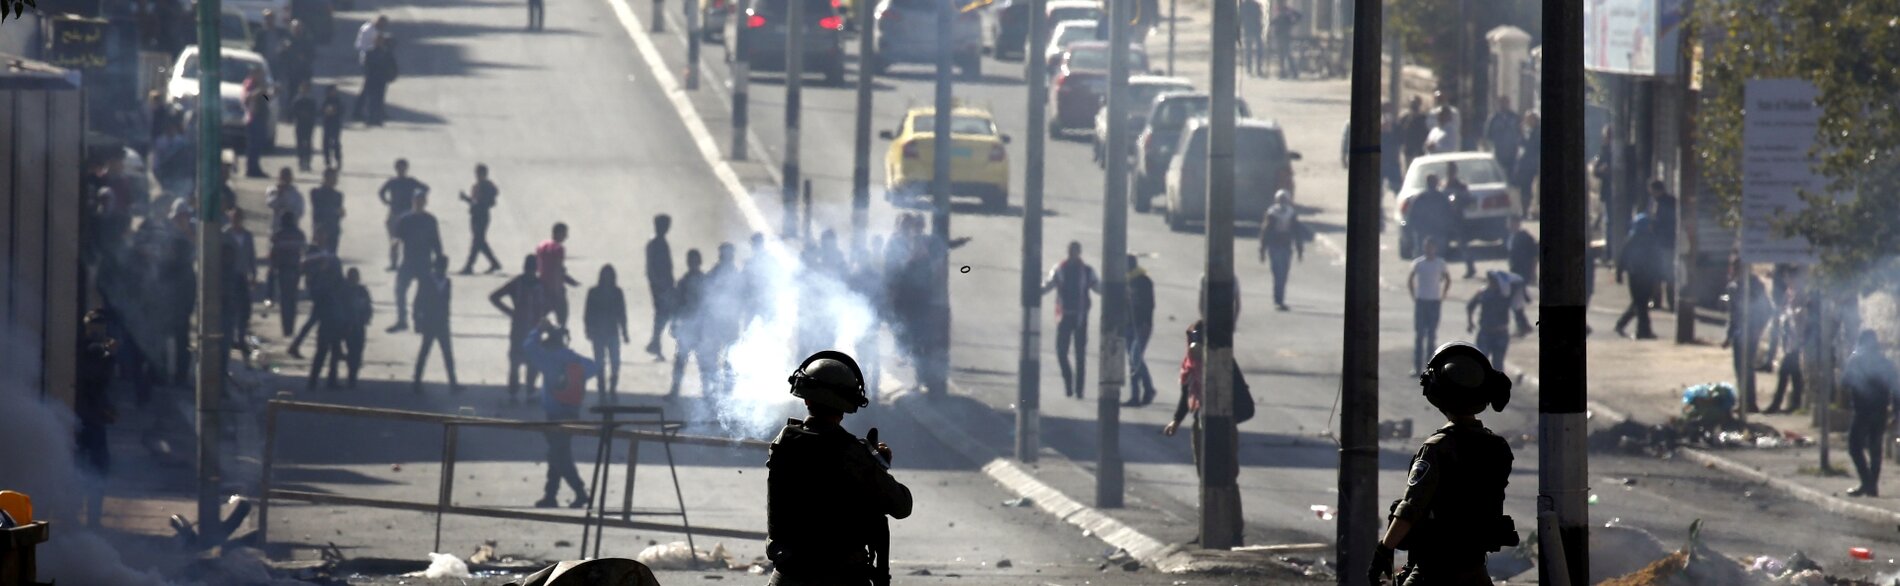 Clashes between Palestinians and Israeli forces during a protest against the US recognition of Jerusalem as Israel’s capital, Bethlehem,12 December 2017. 